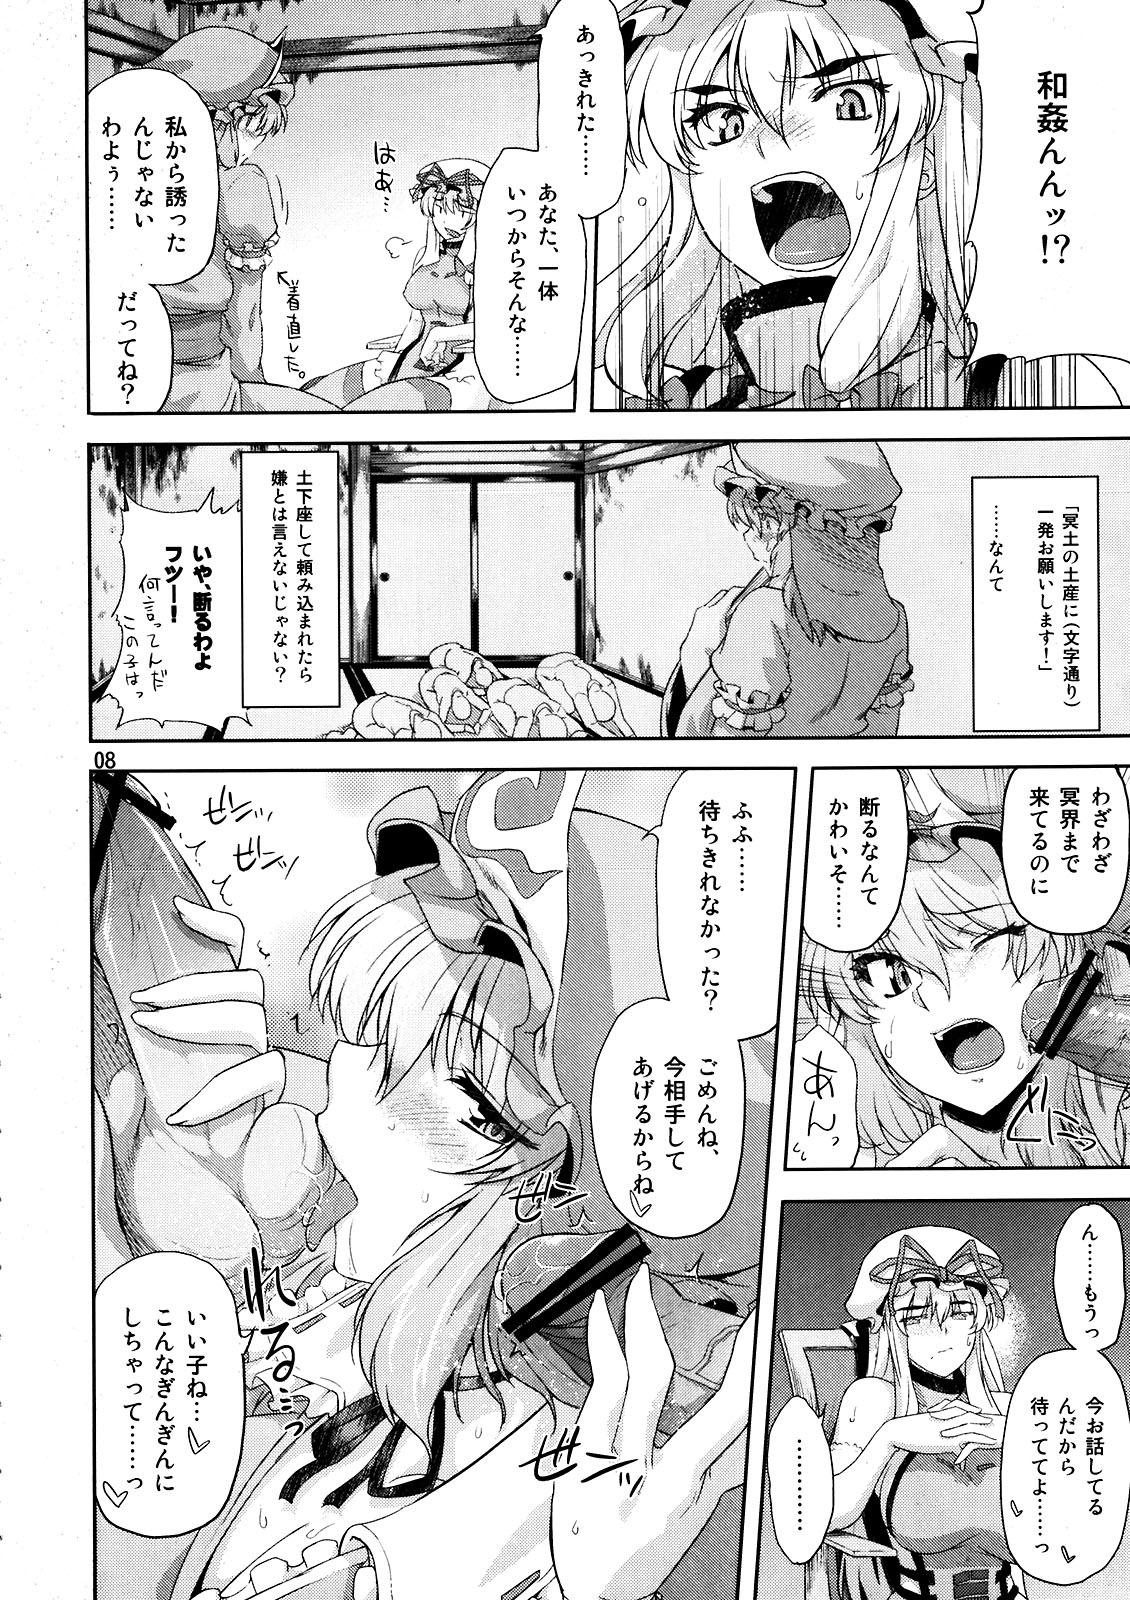 Ass Fucked Toshimaen 0 - Touhou project Ametur Porn - Page 8